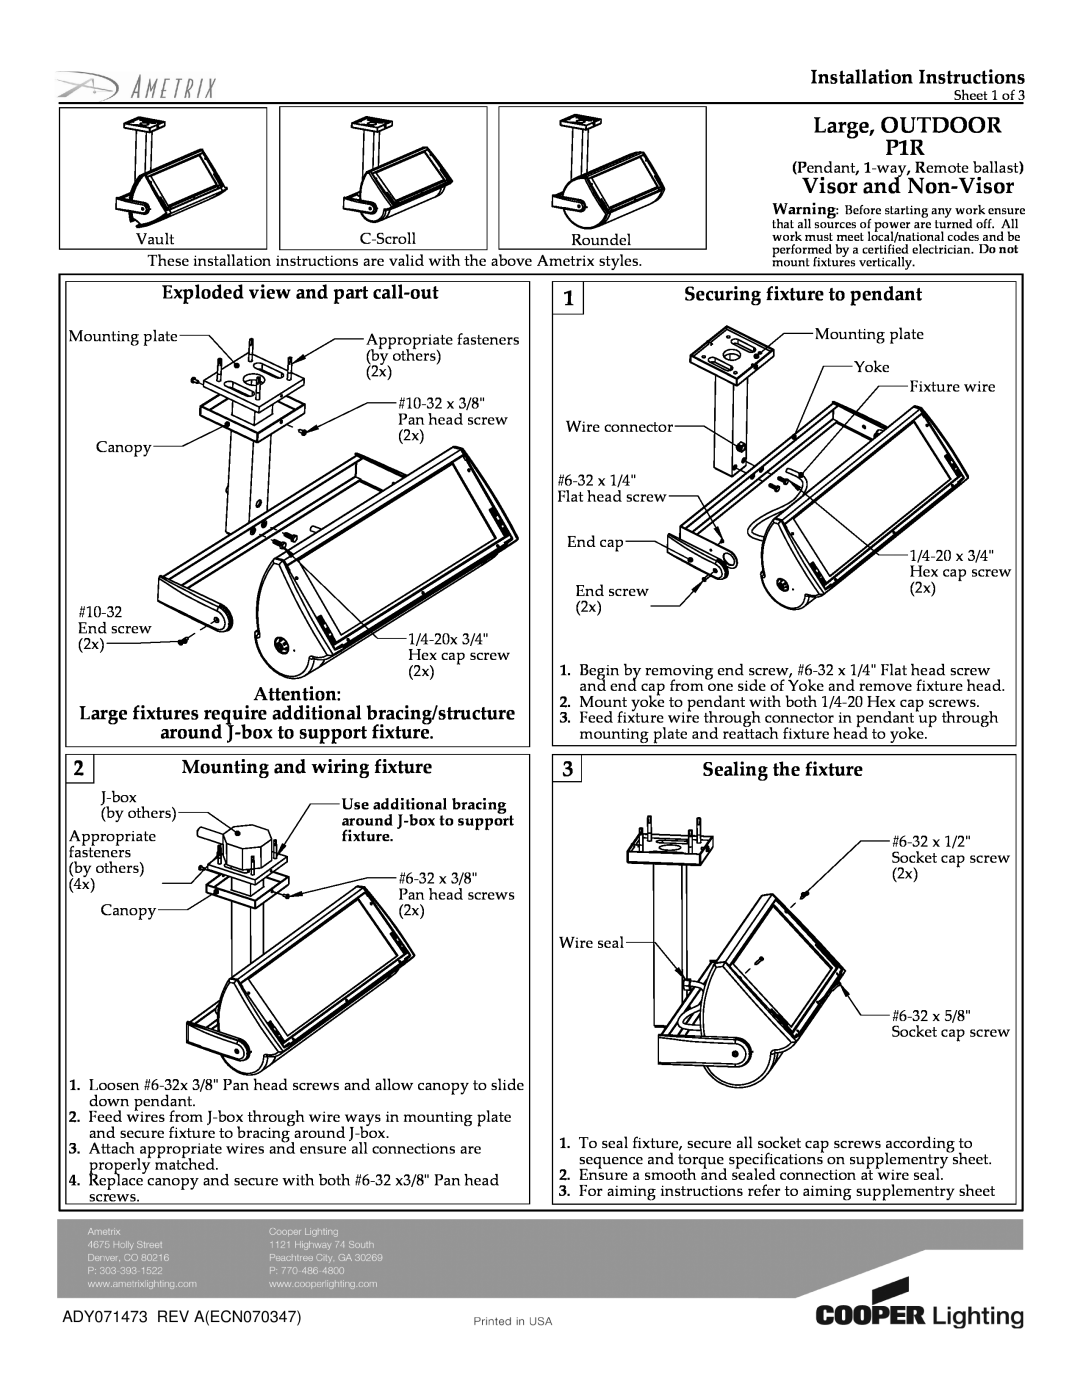 Cooper Lighting ADY071473 installation instructions Large, OUTDOOR P1R, Visor and Non-Visor, Installation Instructions 